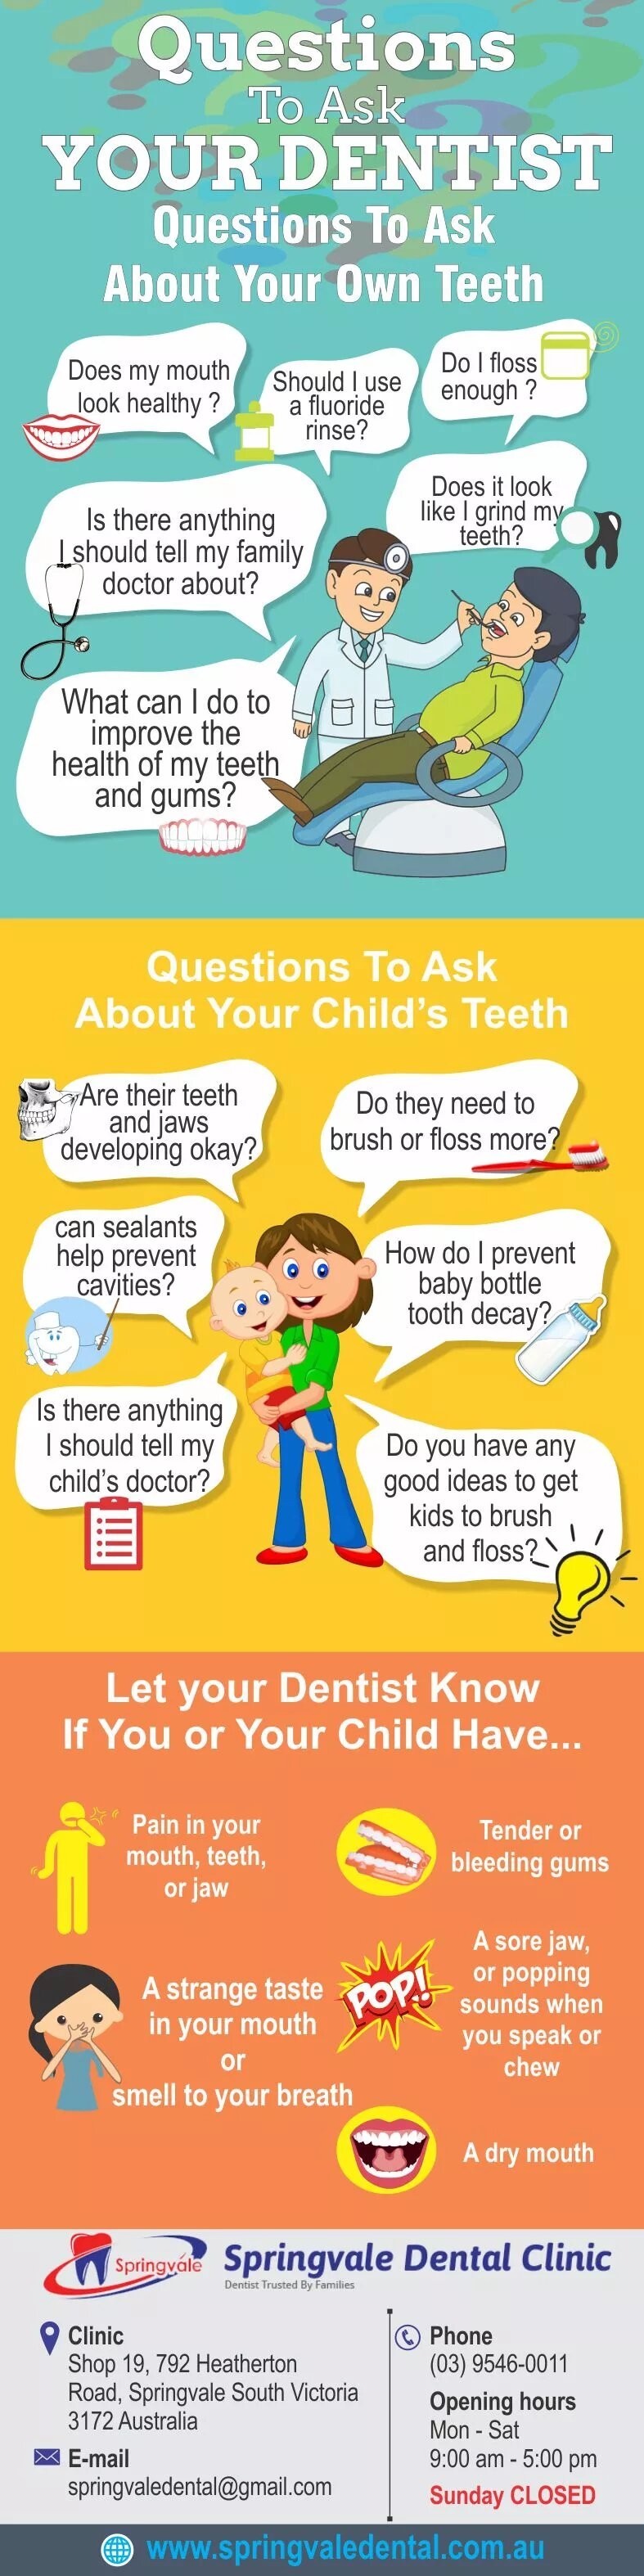 Questions To Ask To Dentist